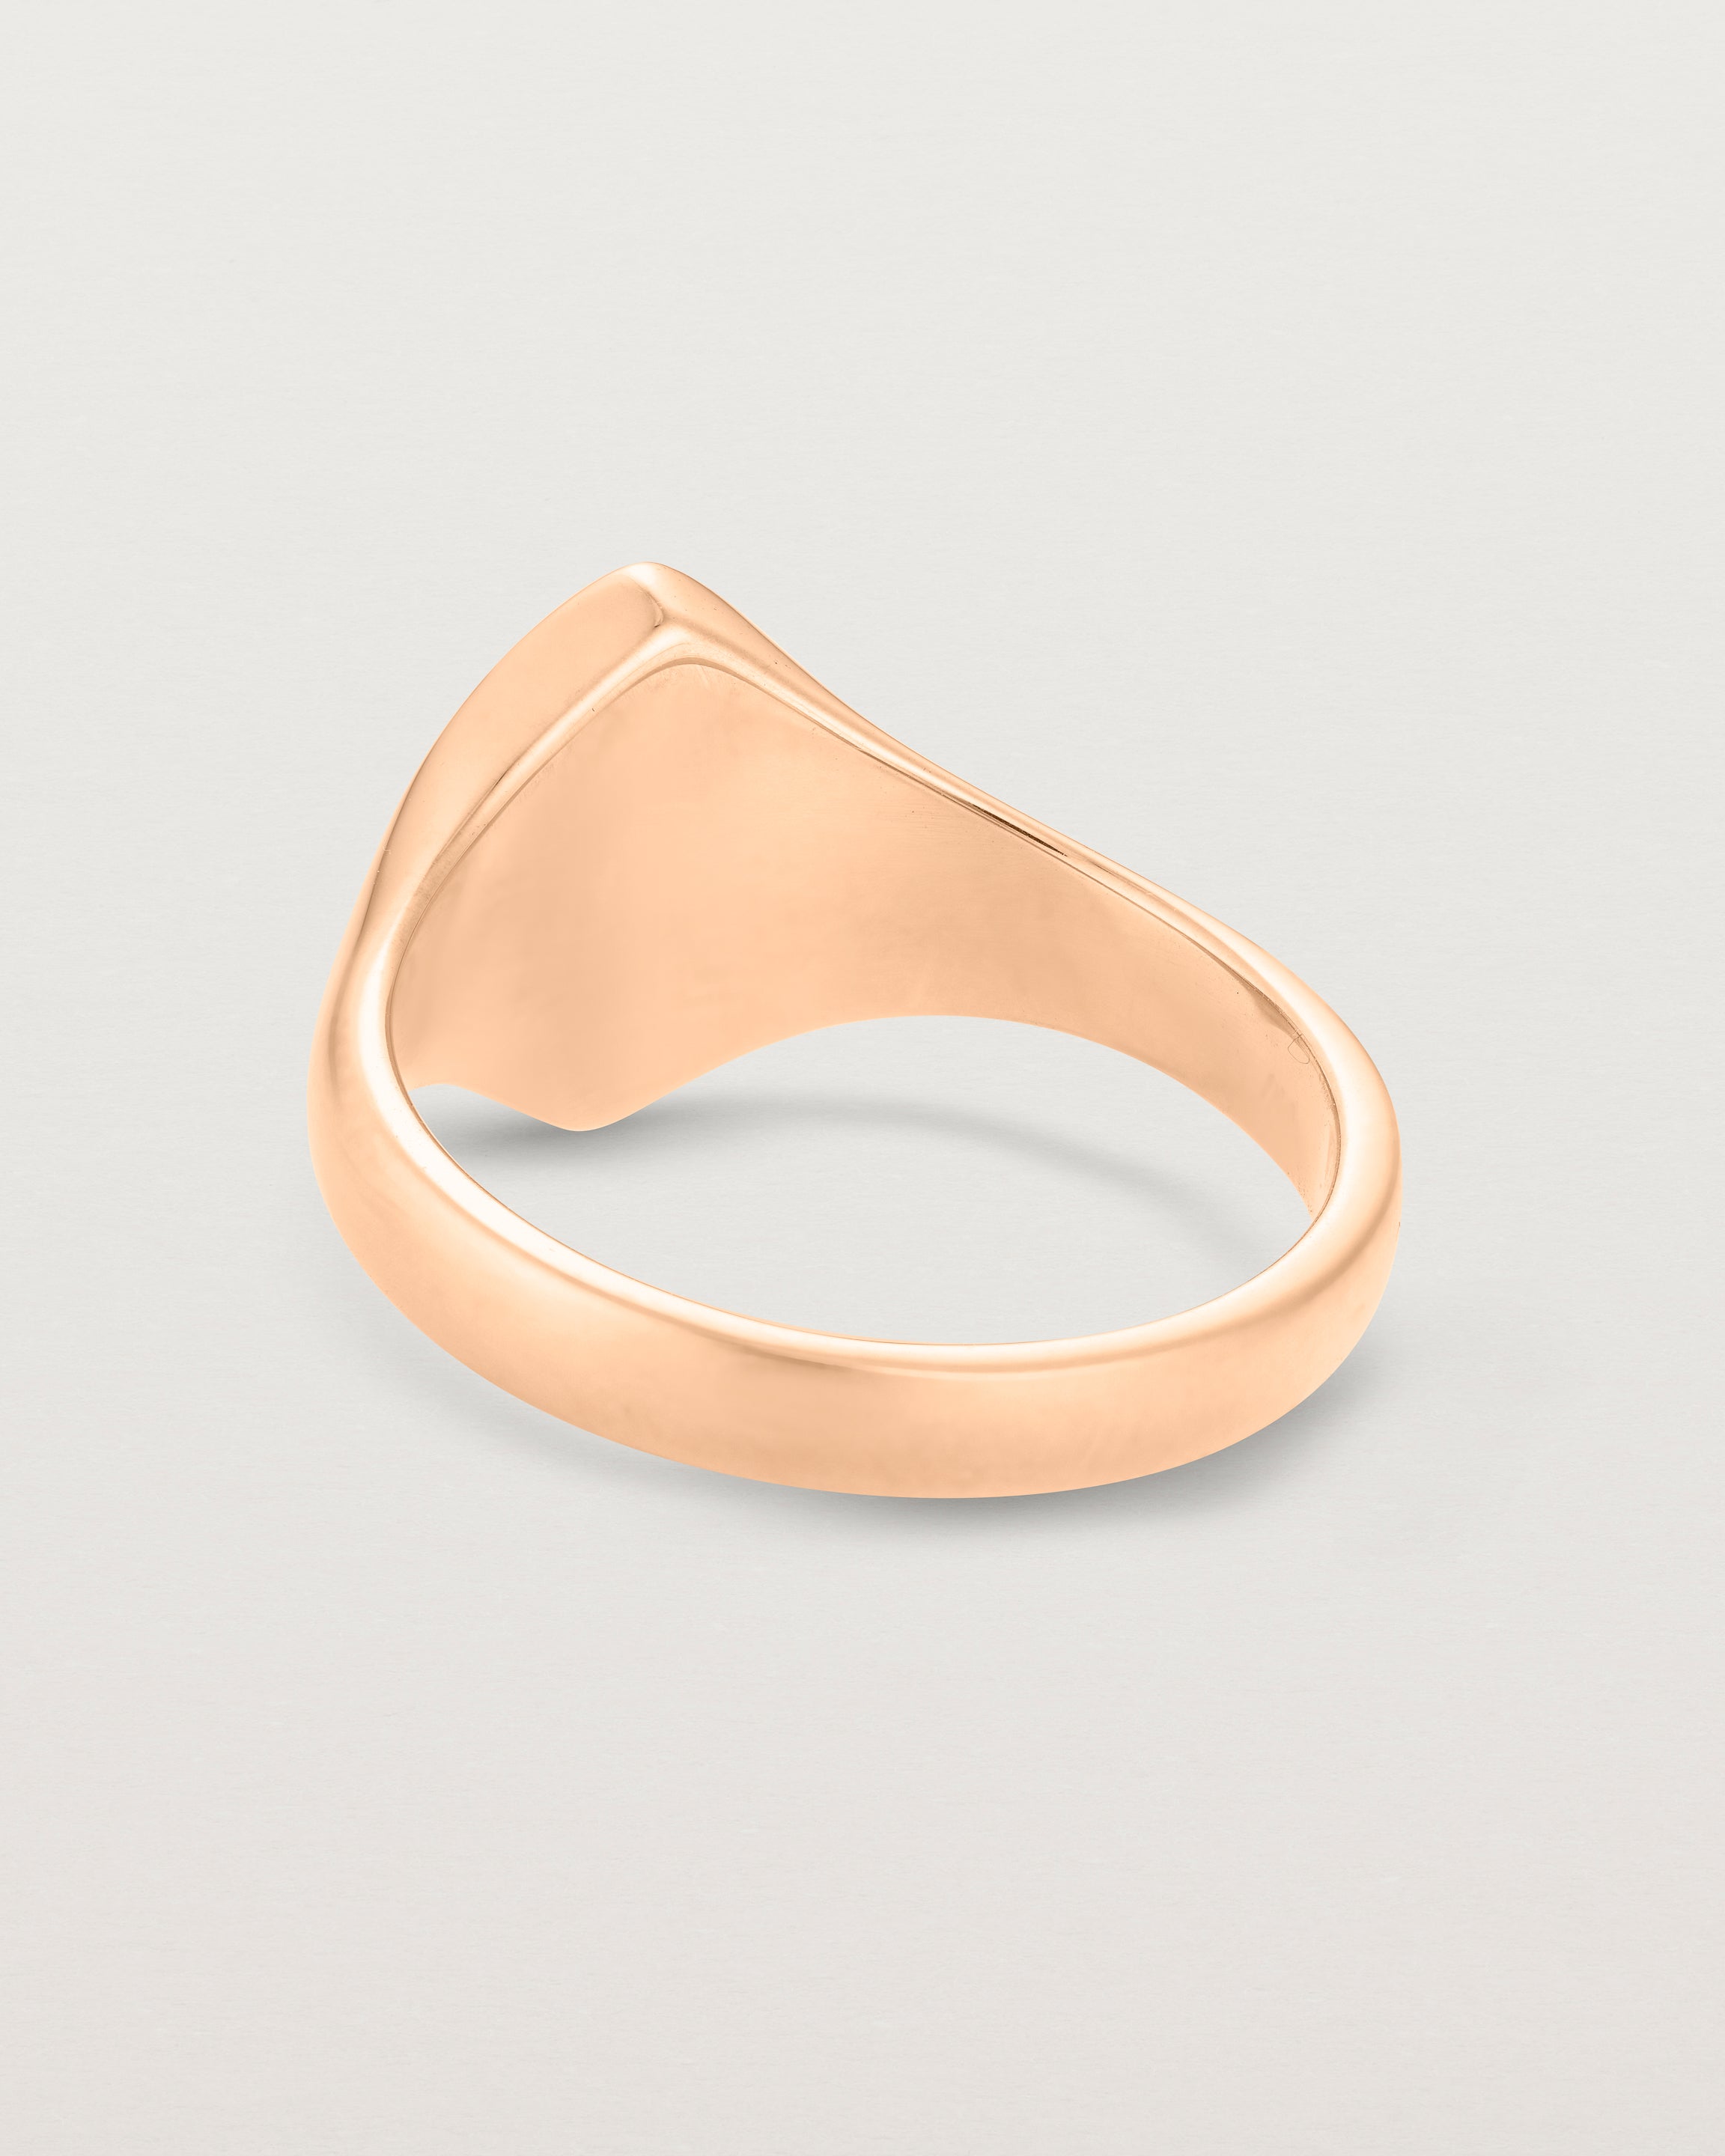 Back view of the Willow Millgrain Signet Ring | Birthstone in rose gold.